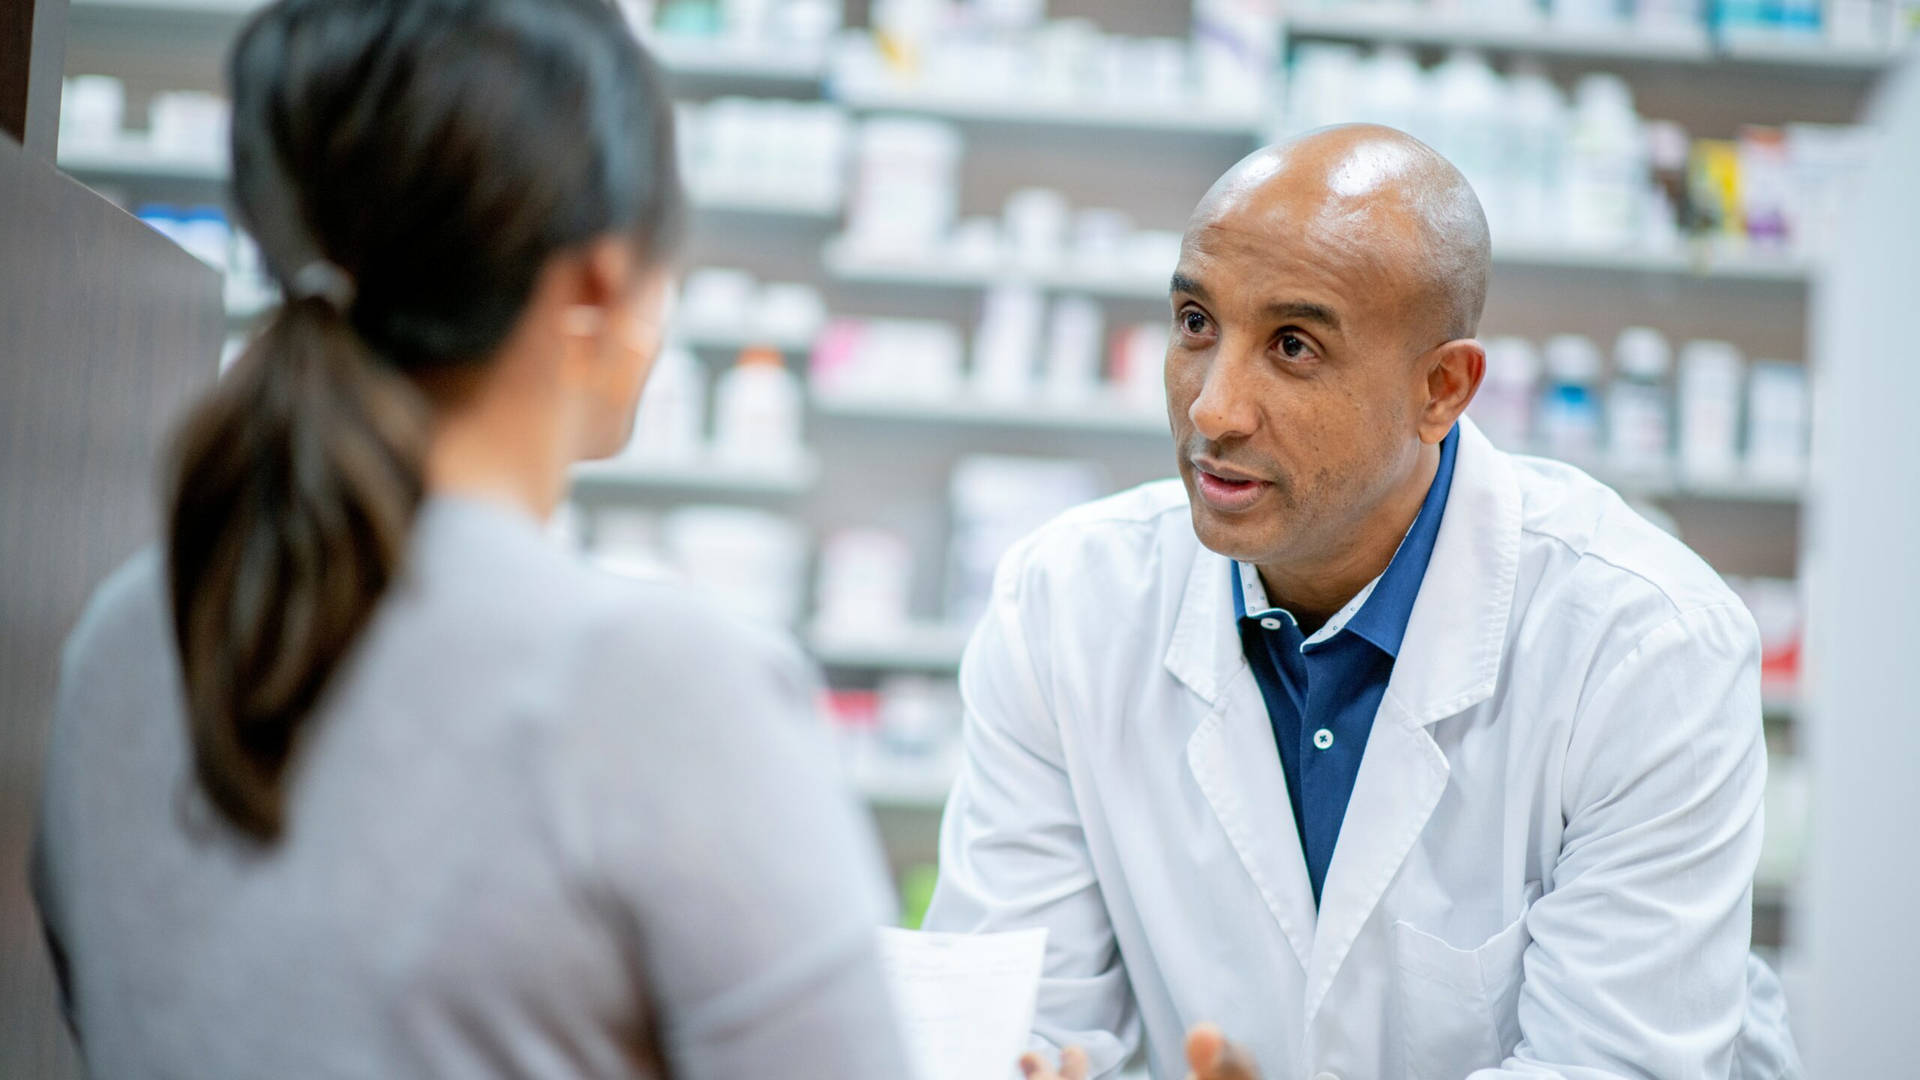 A Professional Pharmacist Consulting With A Customer